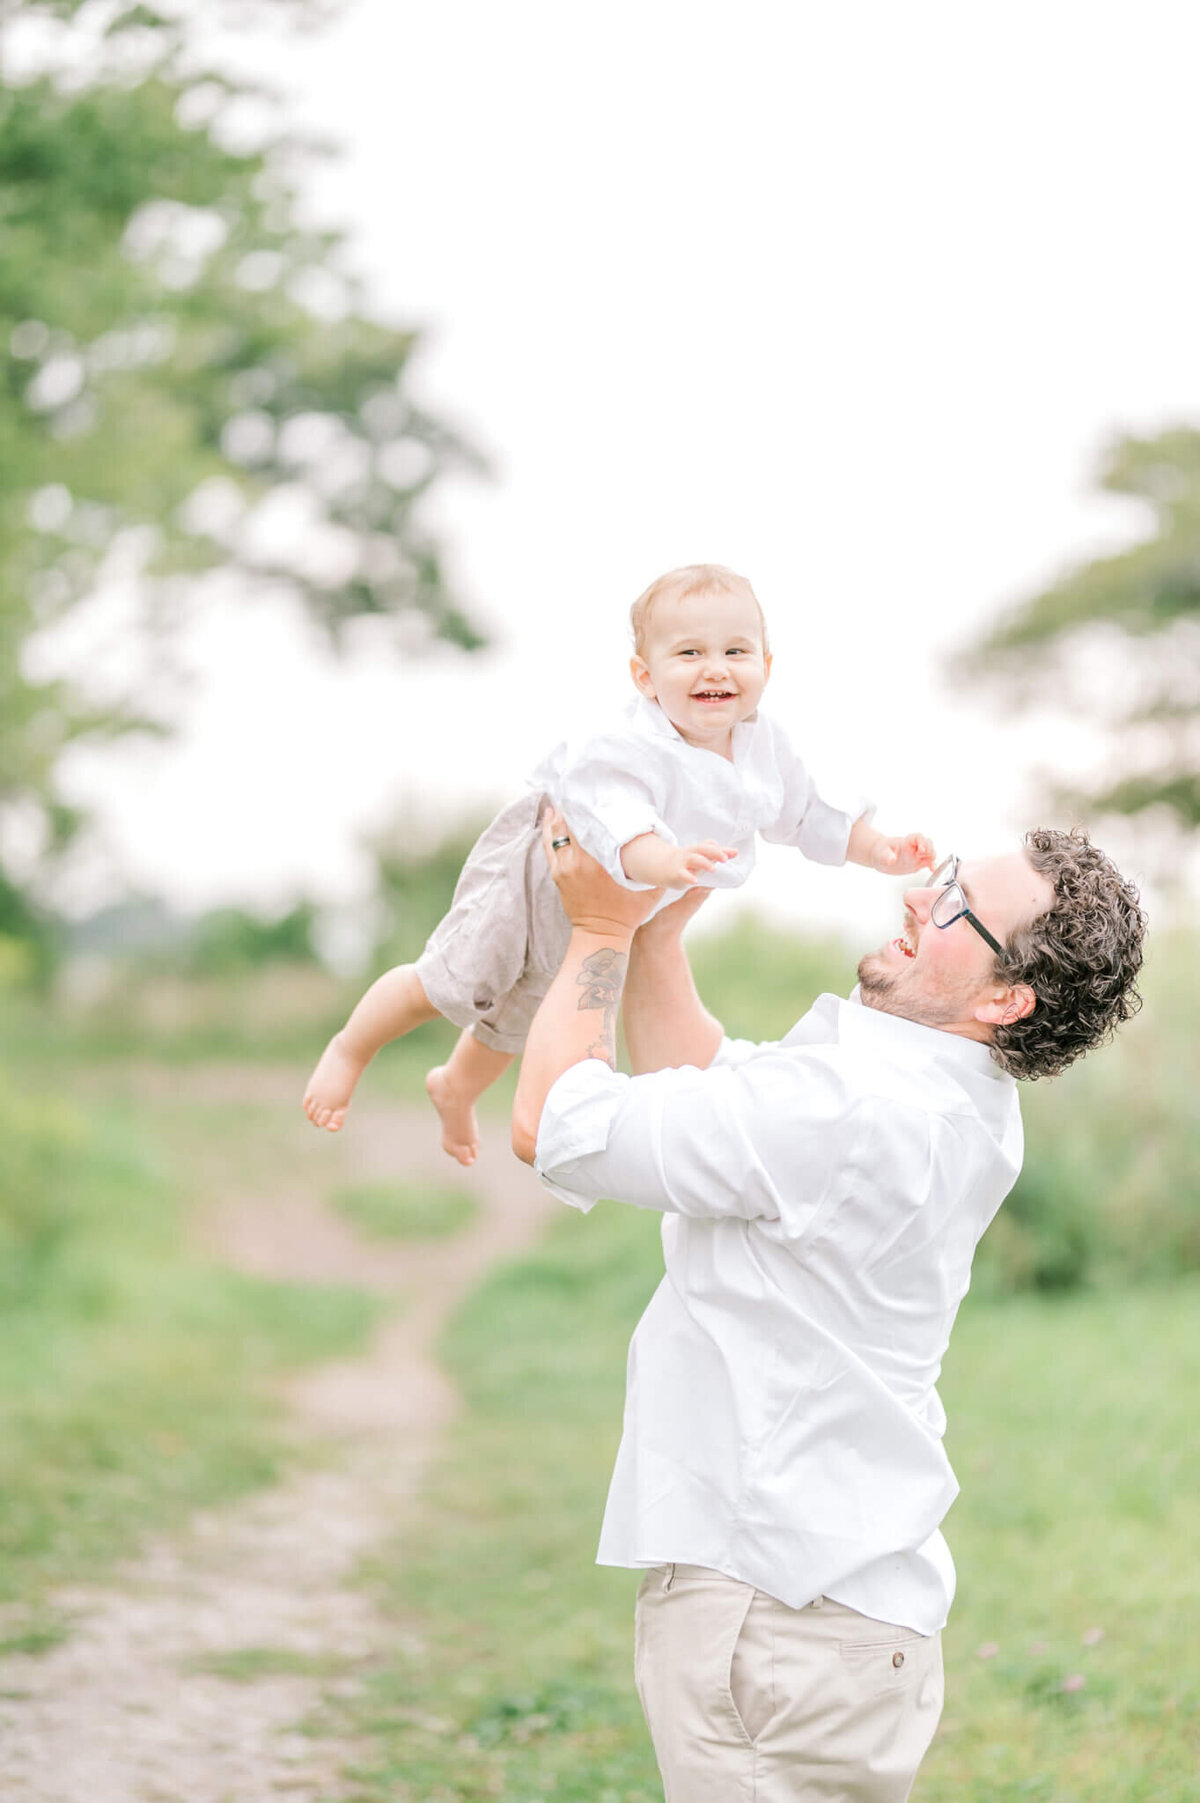 Dad throwing baby son in the air as he is smiling and laughing